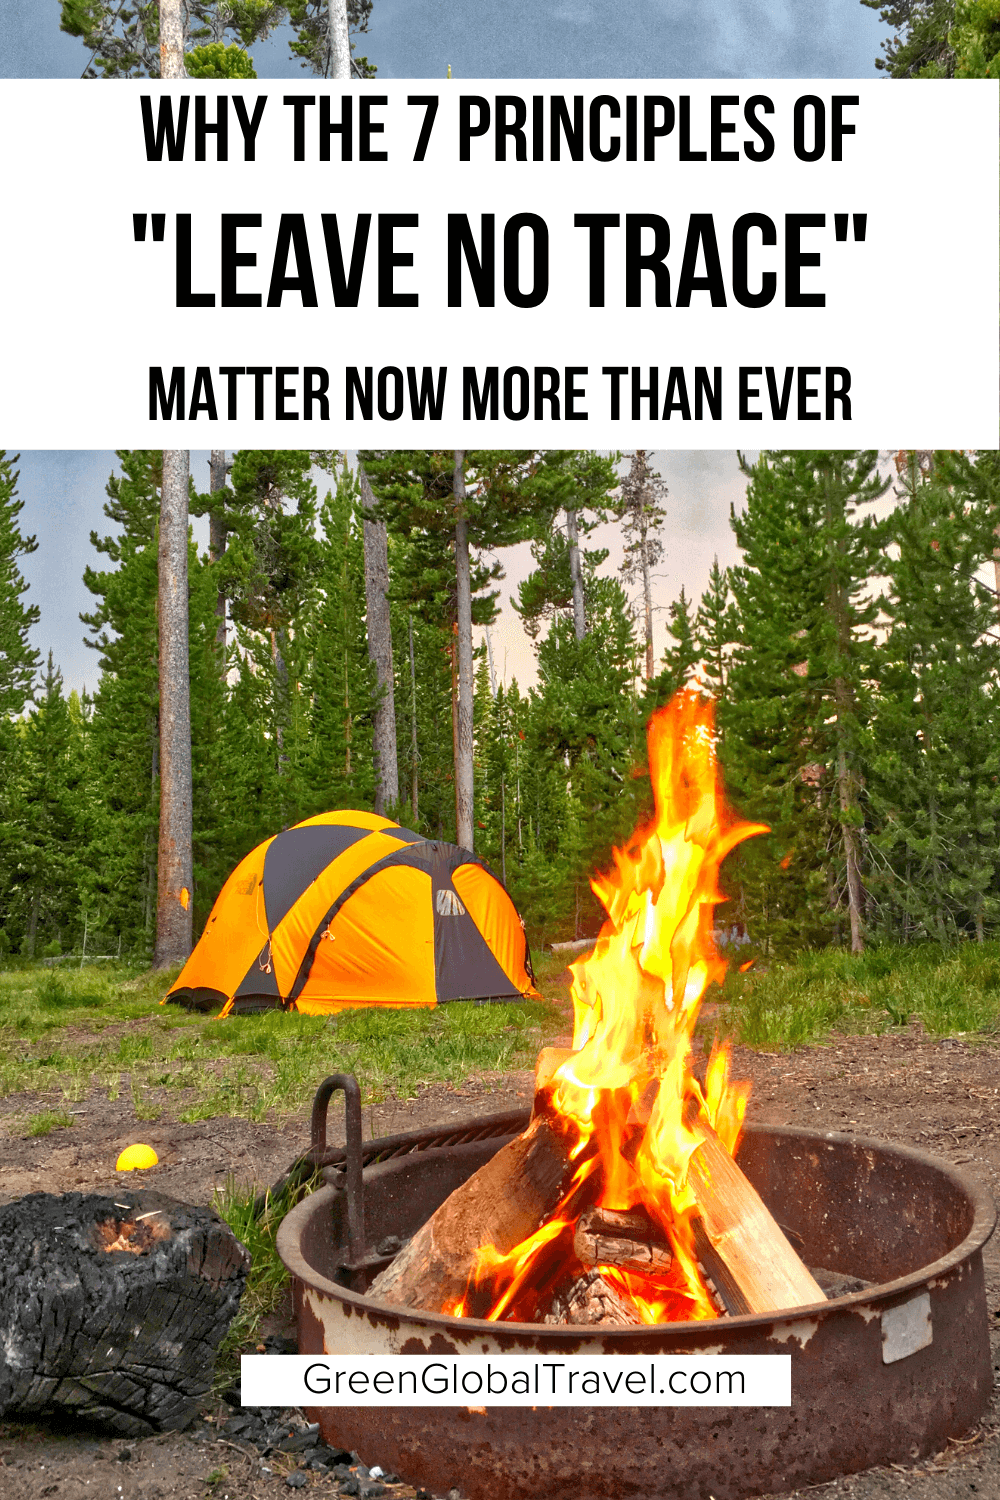 Why the 7 Principles of Leave No Trace Matter More Than Ever. Includes LNT history, what the 7 LNT principles are and; how we can be environmental stewards. | leaving no trace | environmental stewardship | responsible travel | leave no trace principle | leave no trace principles | responsible tourism | leave no trace principles for kids | lnt principles | leave no trace seven principles | stewardship of nature | environmental stewardship examples | environmental stewardship | responsible travel